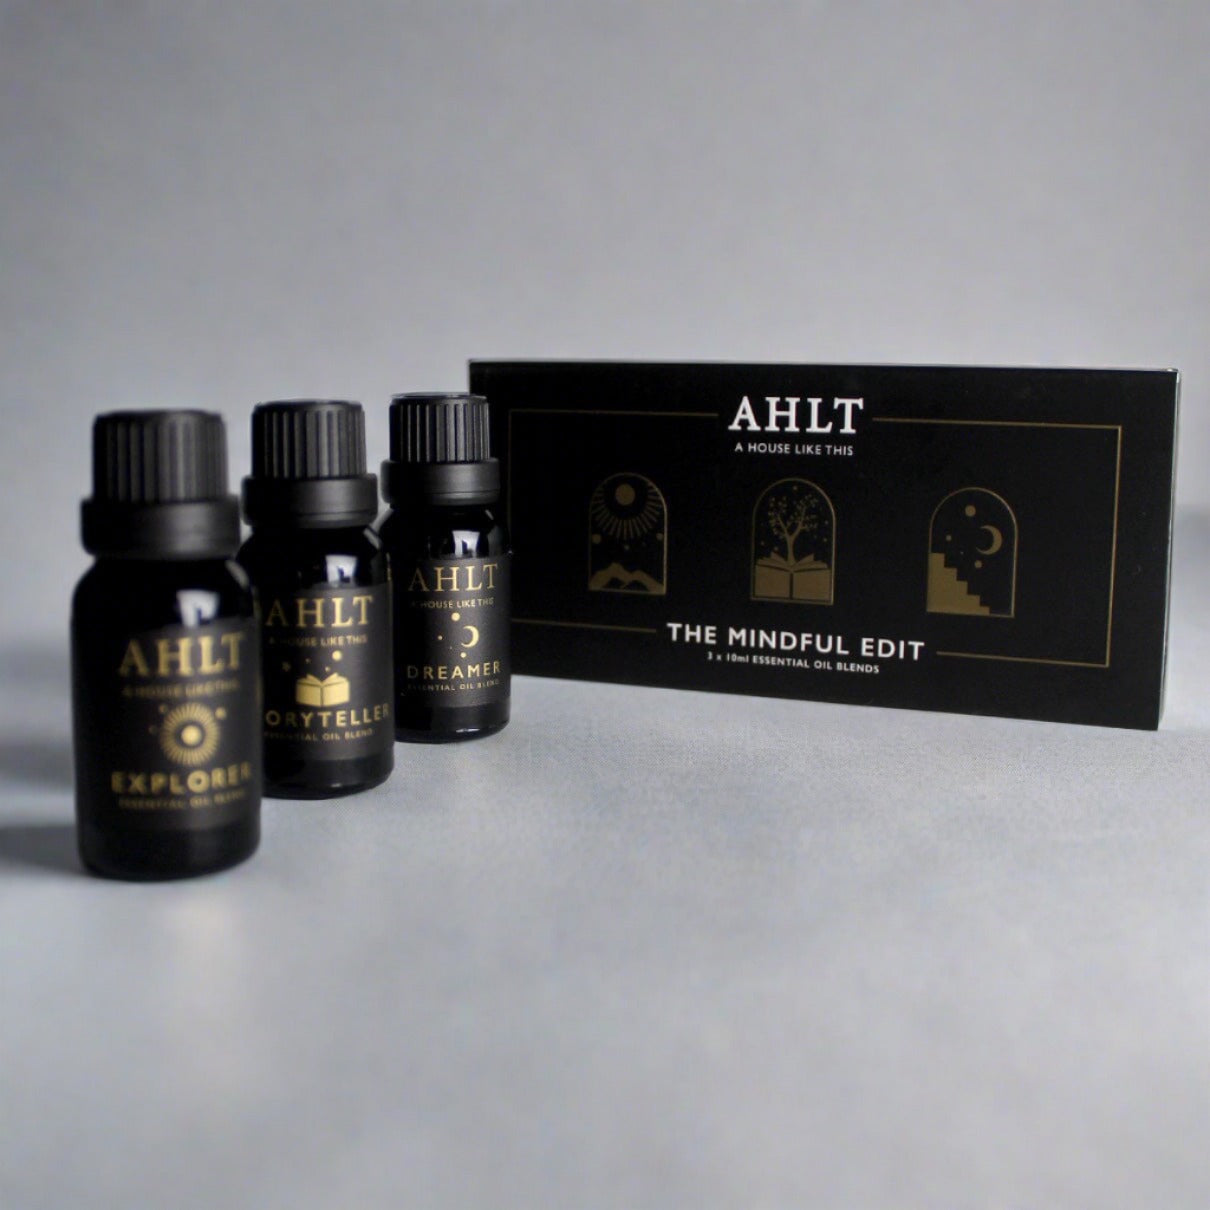 STORYTELLER Uplifting Essential Oil Blend for happiness - AHLT - 10ml – A  House Like This